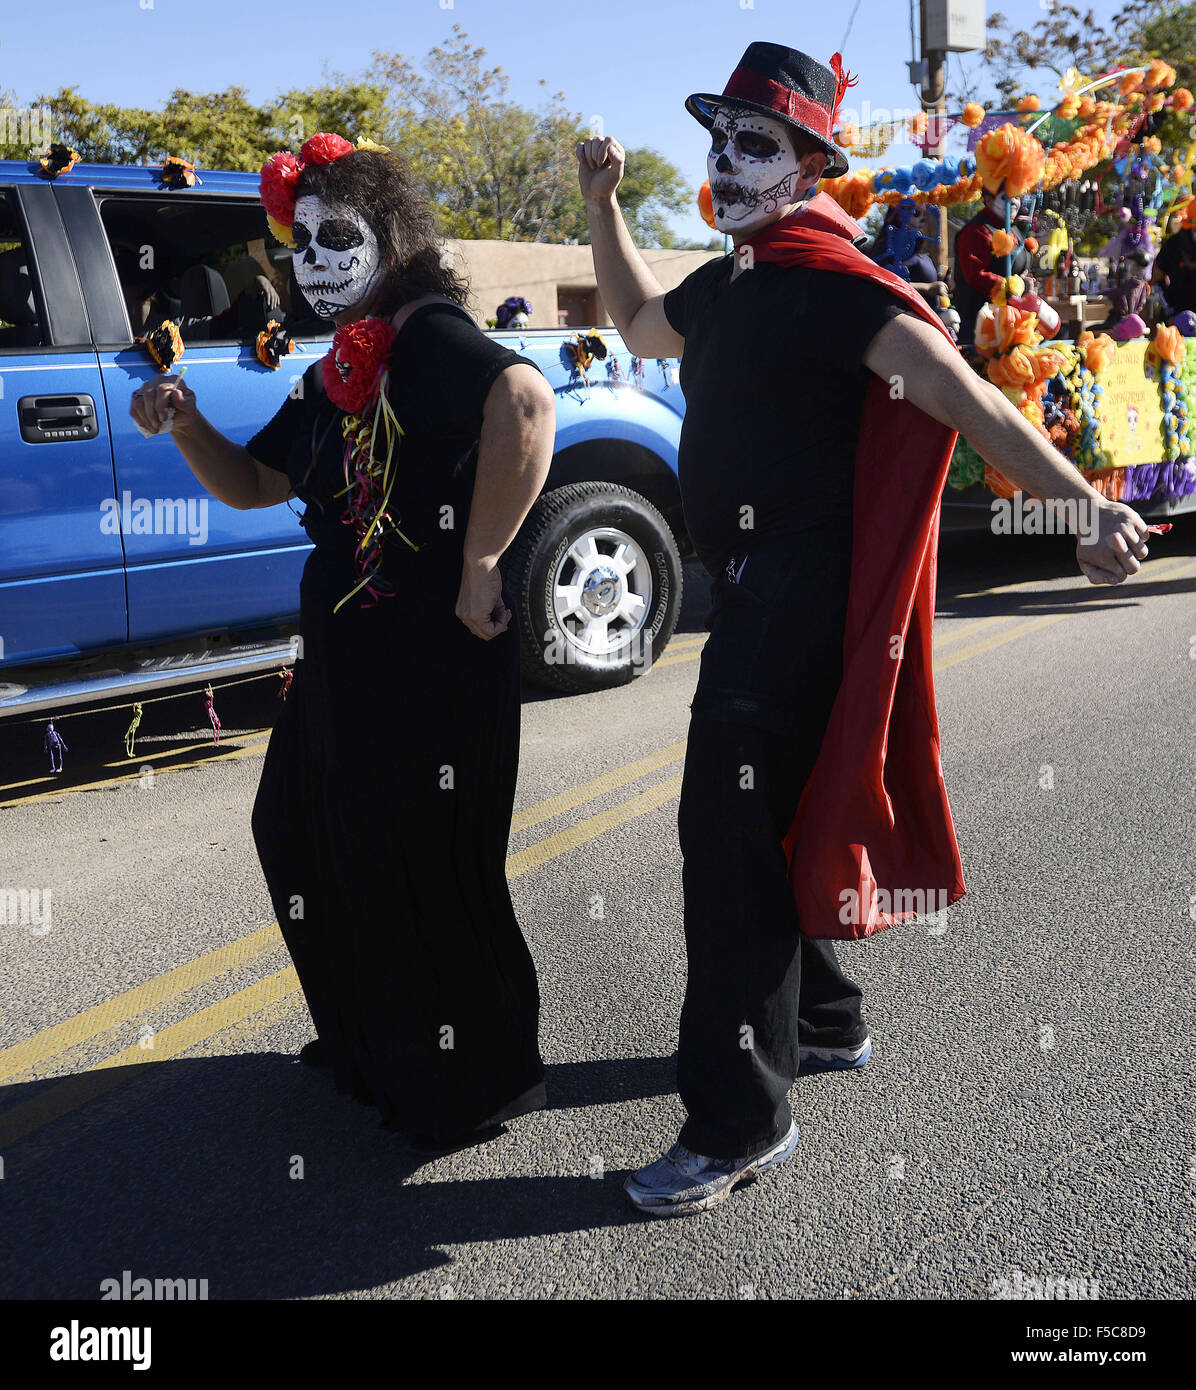 Albuquerque, NEW MEXICO, USA. 1st Nov, 2015. 110115.Theresa Zamora, left and Dallas Hawkes, dance during the Dia de Los Muertos Marigold Parade. The pair was part of the Cervantes float. Thousands line up Isleta Blvd. to watch the parade .Photographed on Sunday November 1, 2015 . /Adolphe Pierre-Louis/Journal. © Adolphe Pierre-Louis/Albuquerque Journal/ZUMA Wire/Alamy Live News Stock Photo